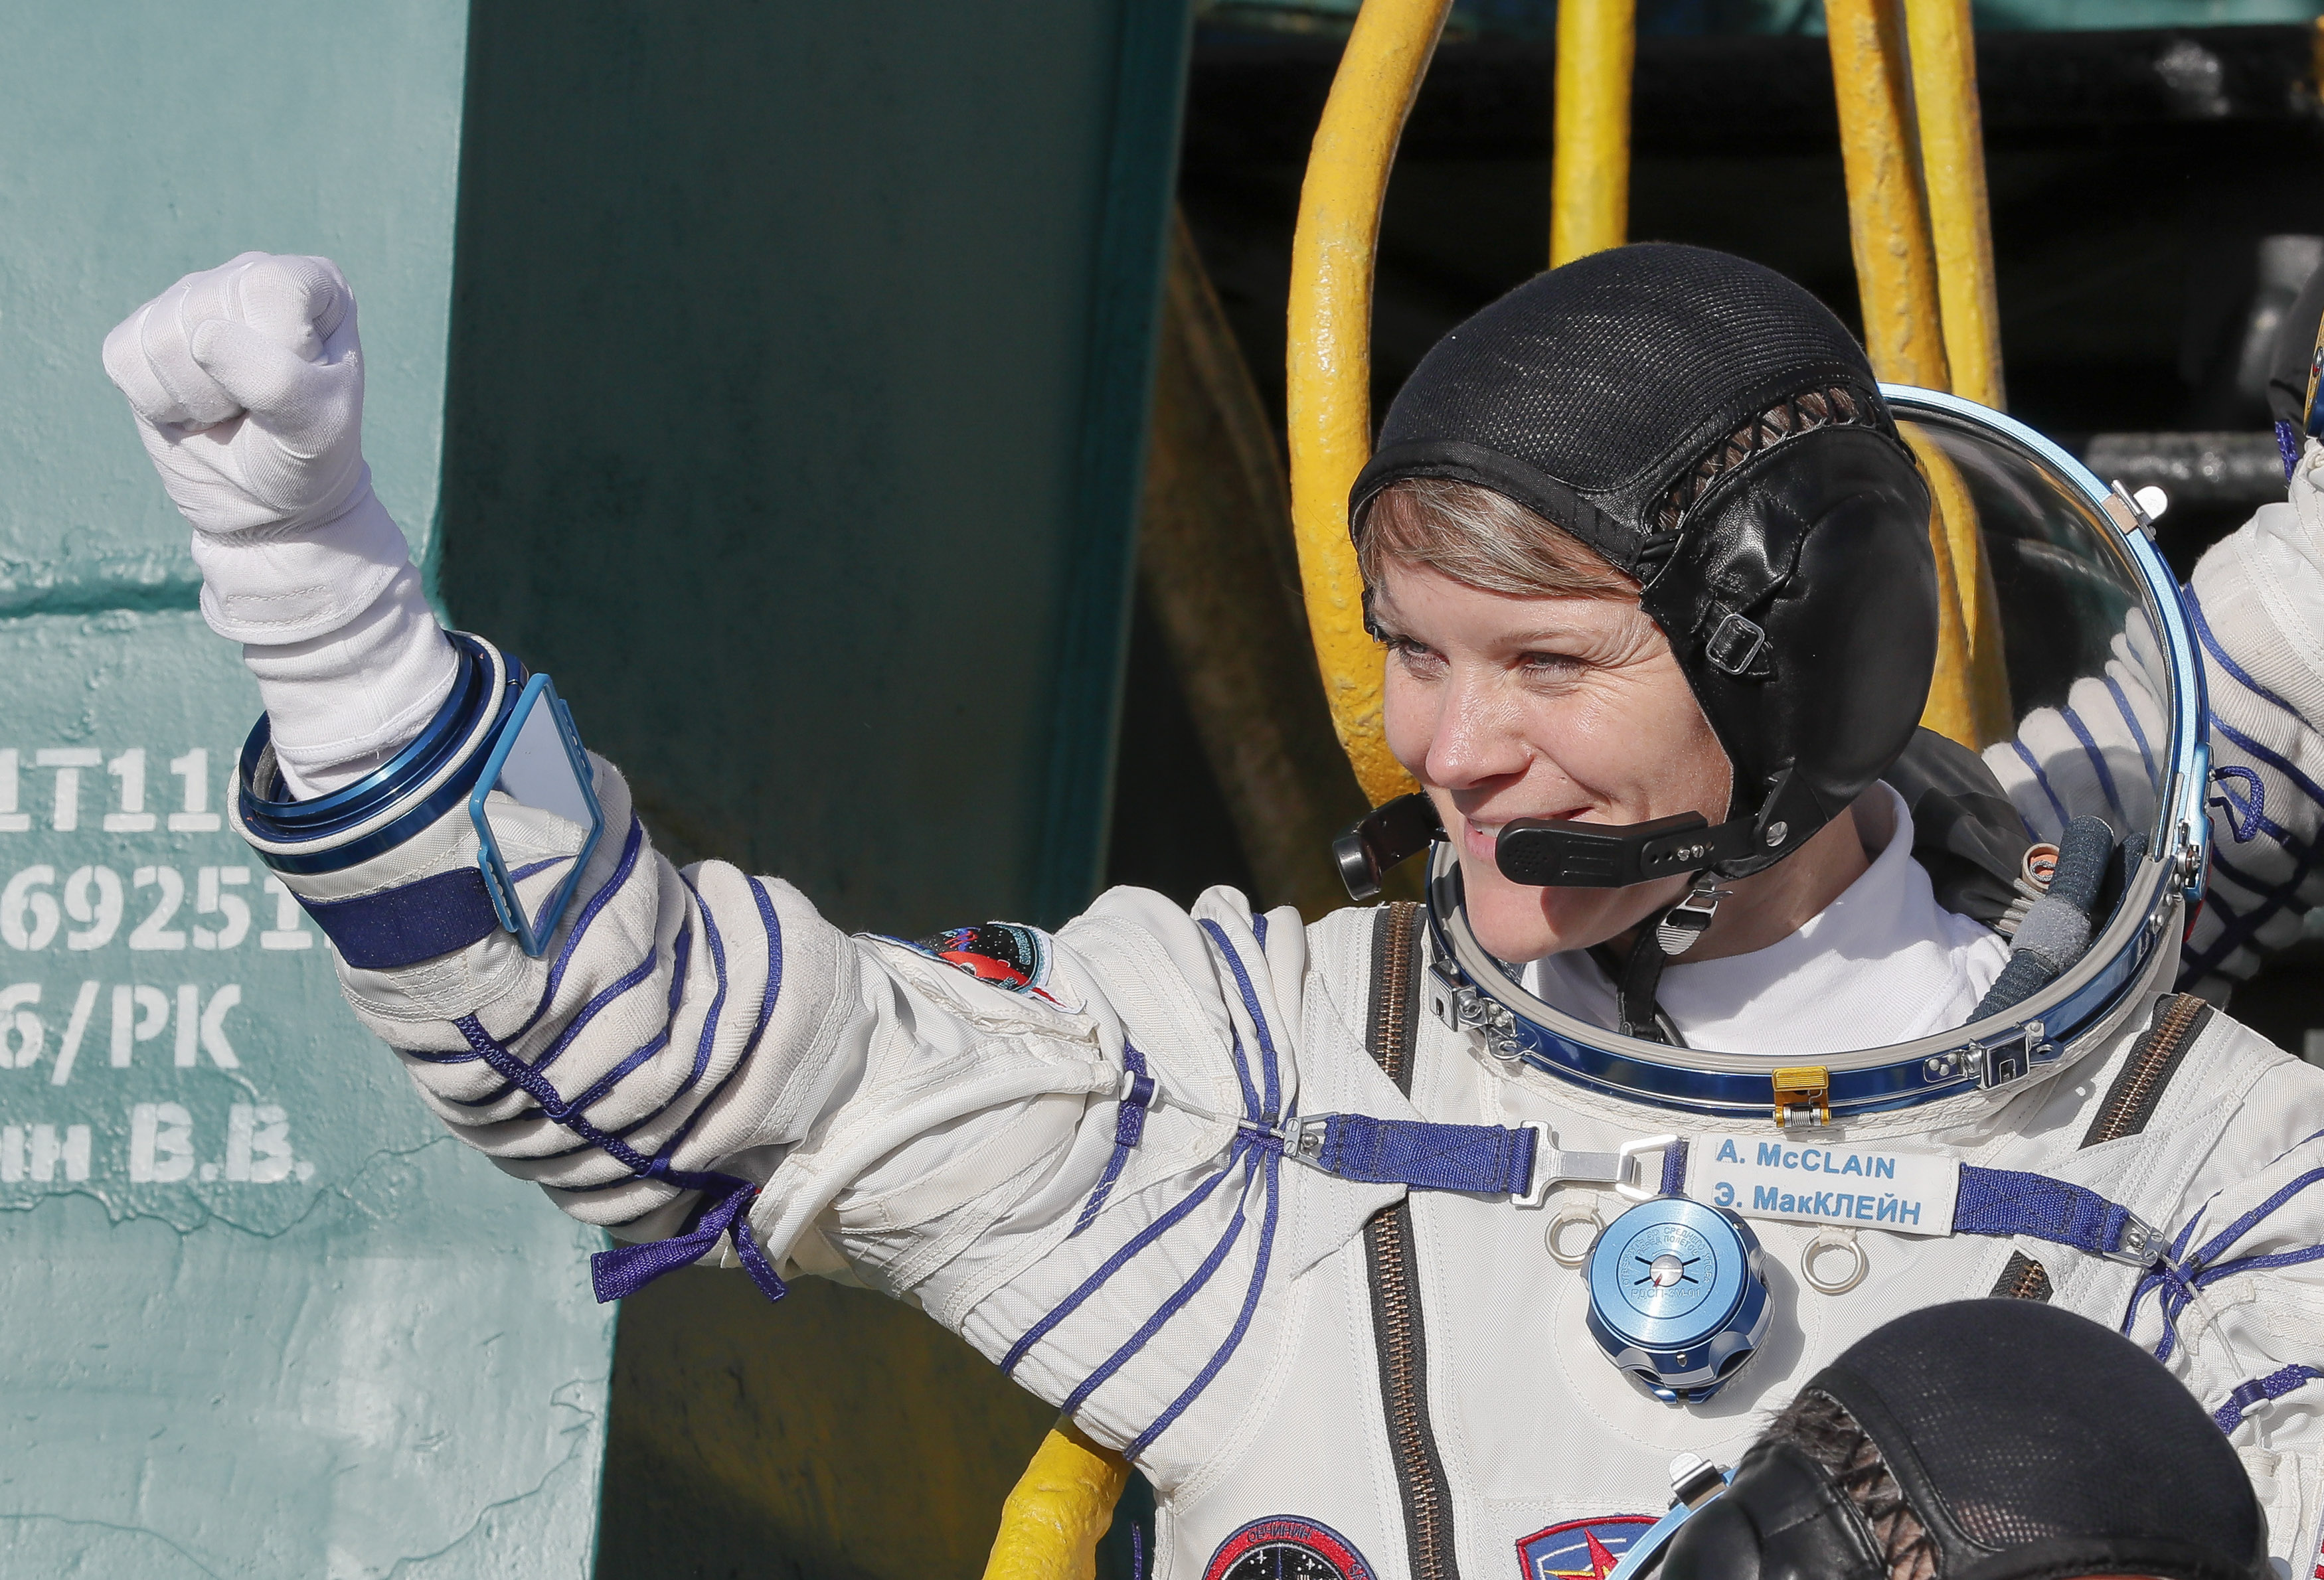 NASA astronaut Anne McClain, a member of the International Space Station (ISS) expedition 58/59, gestures as she boards the Soyuz MS-11 spacecraft shortly before the launch at the Russian-leased Baikonur cosmodrome in Kazakhstan on December 3, 2018. (SHAMIL ZHUMATOV/AFP/Getty Images)